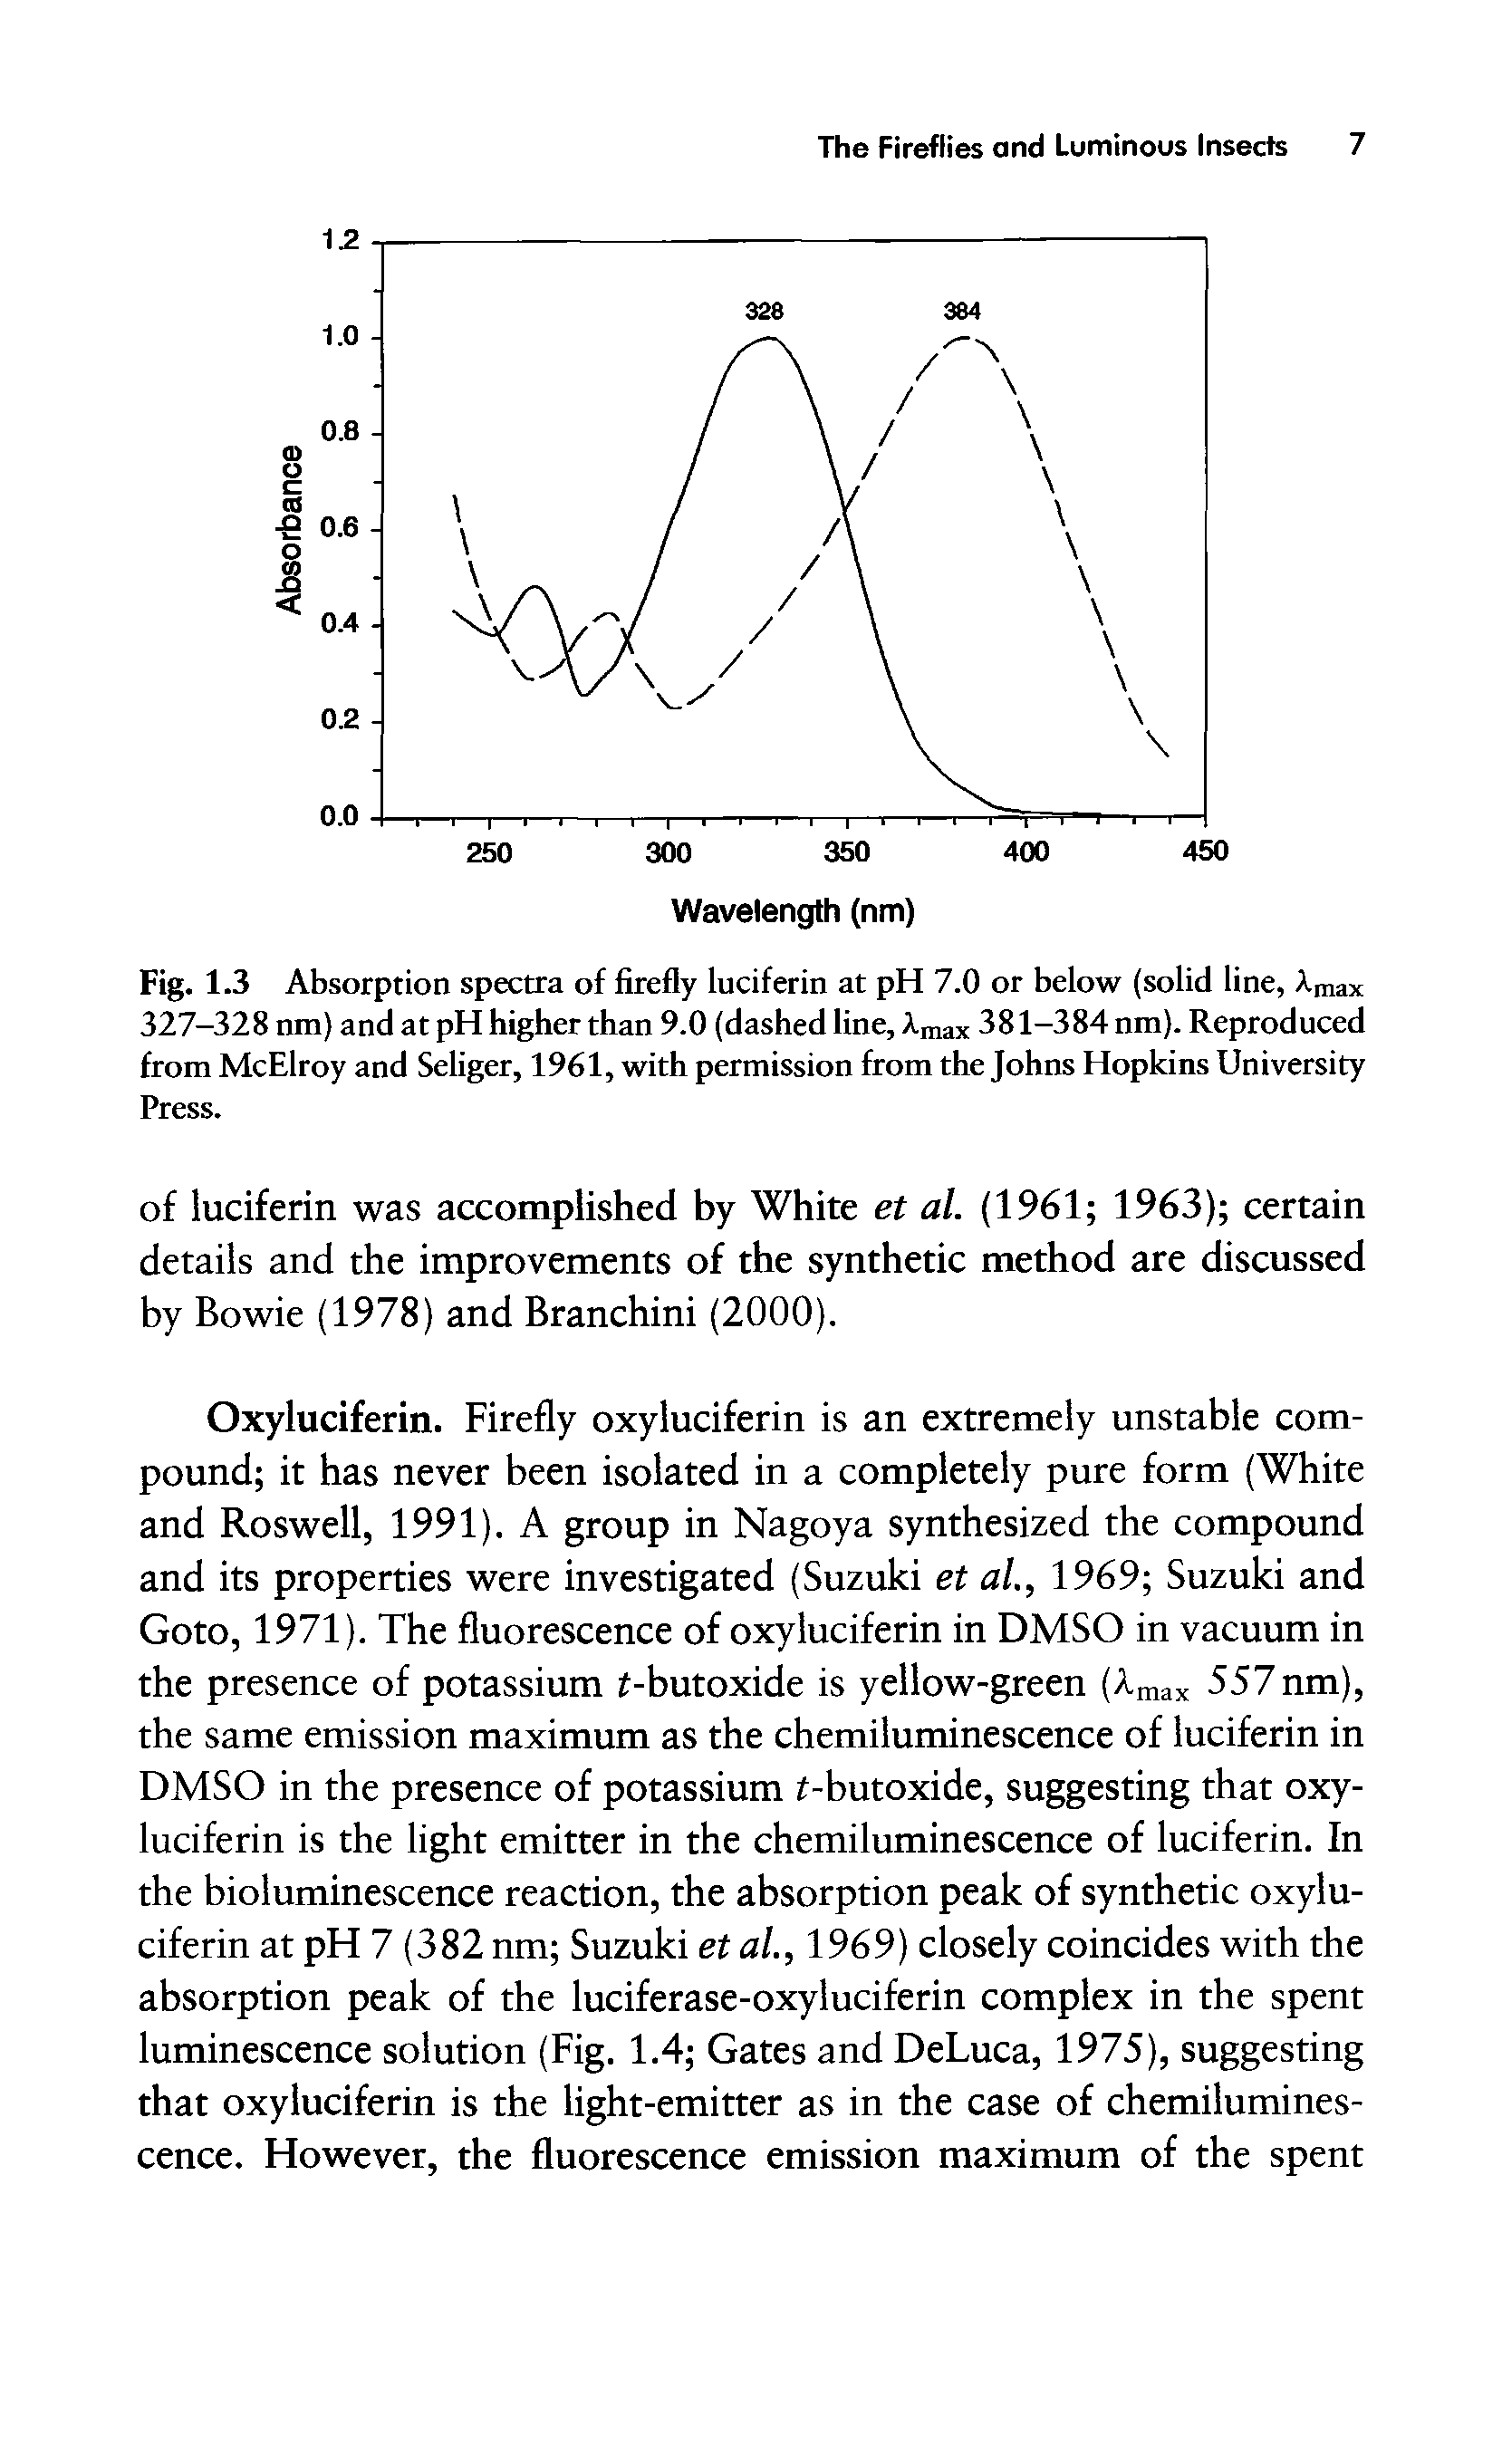 Fig. 1.3 Absorption spectra of firefly luciferin at pH 7.0 or below (solid line, Xmax 327-328 nm) and at pH higher than 9.0 (dashed line, Amax 381-384 nm). Reproduced from McElroy and Seliger, 1961, with permission from the Johns Hopkins University Press.